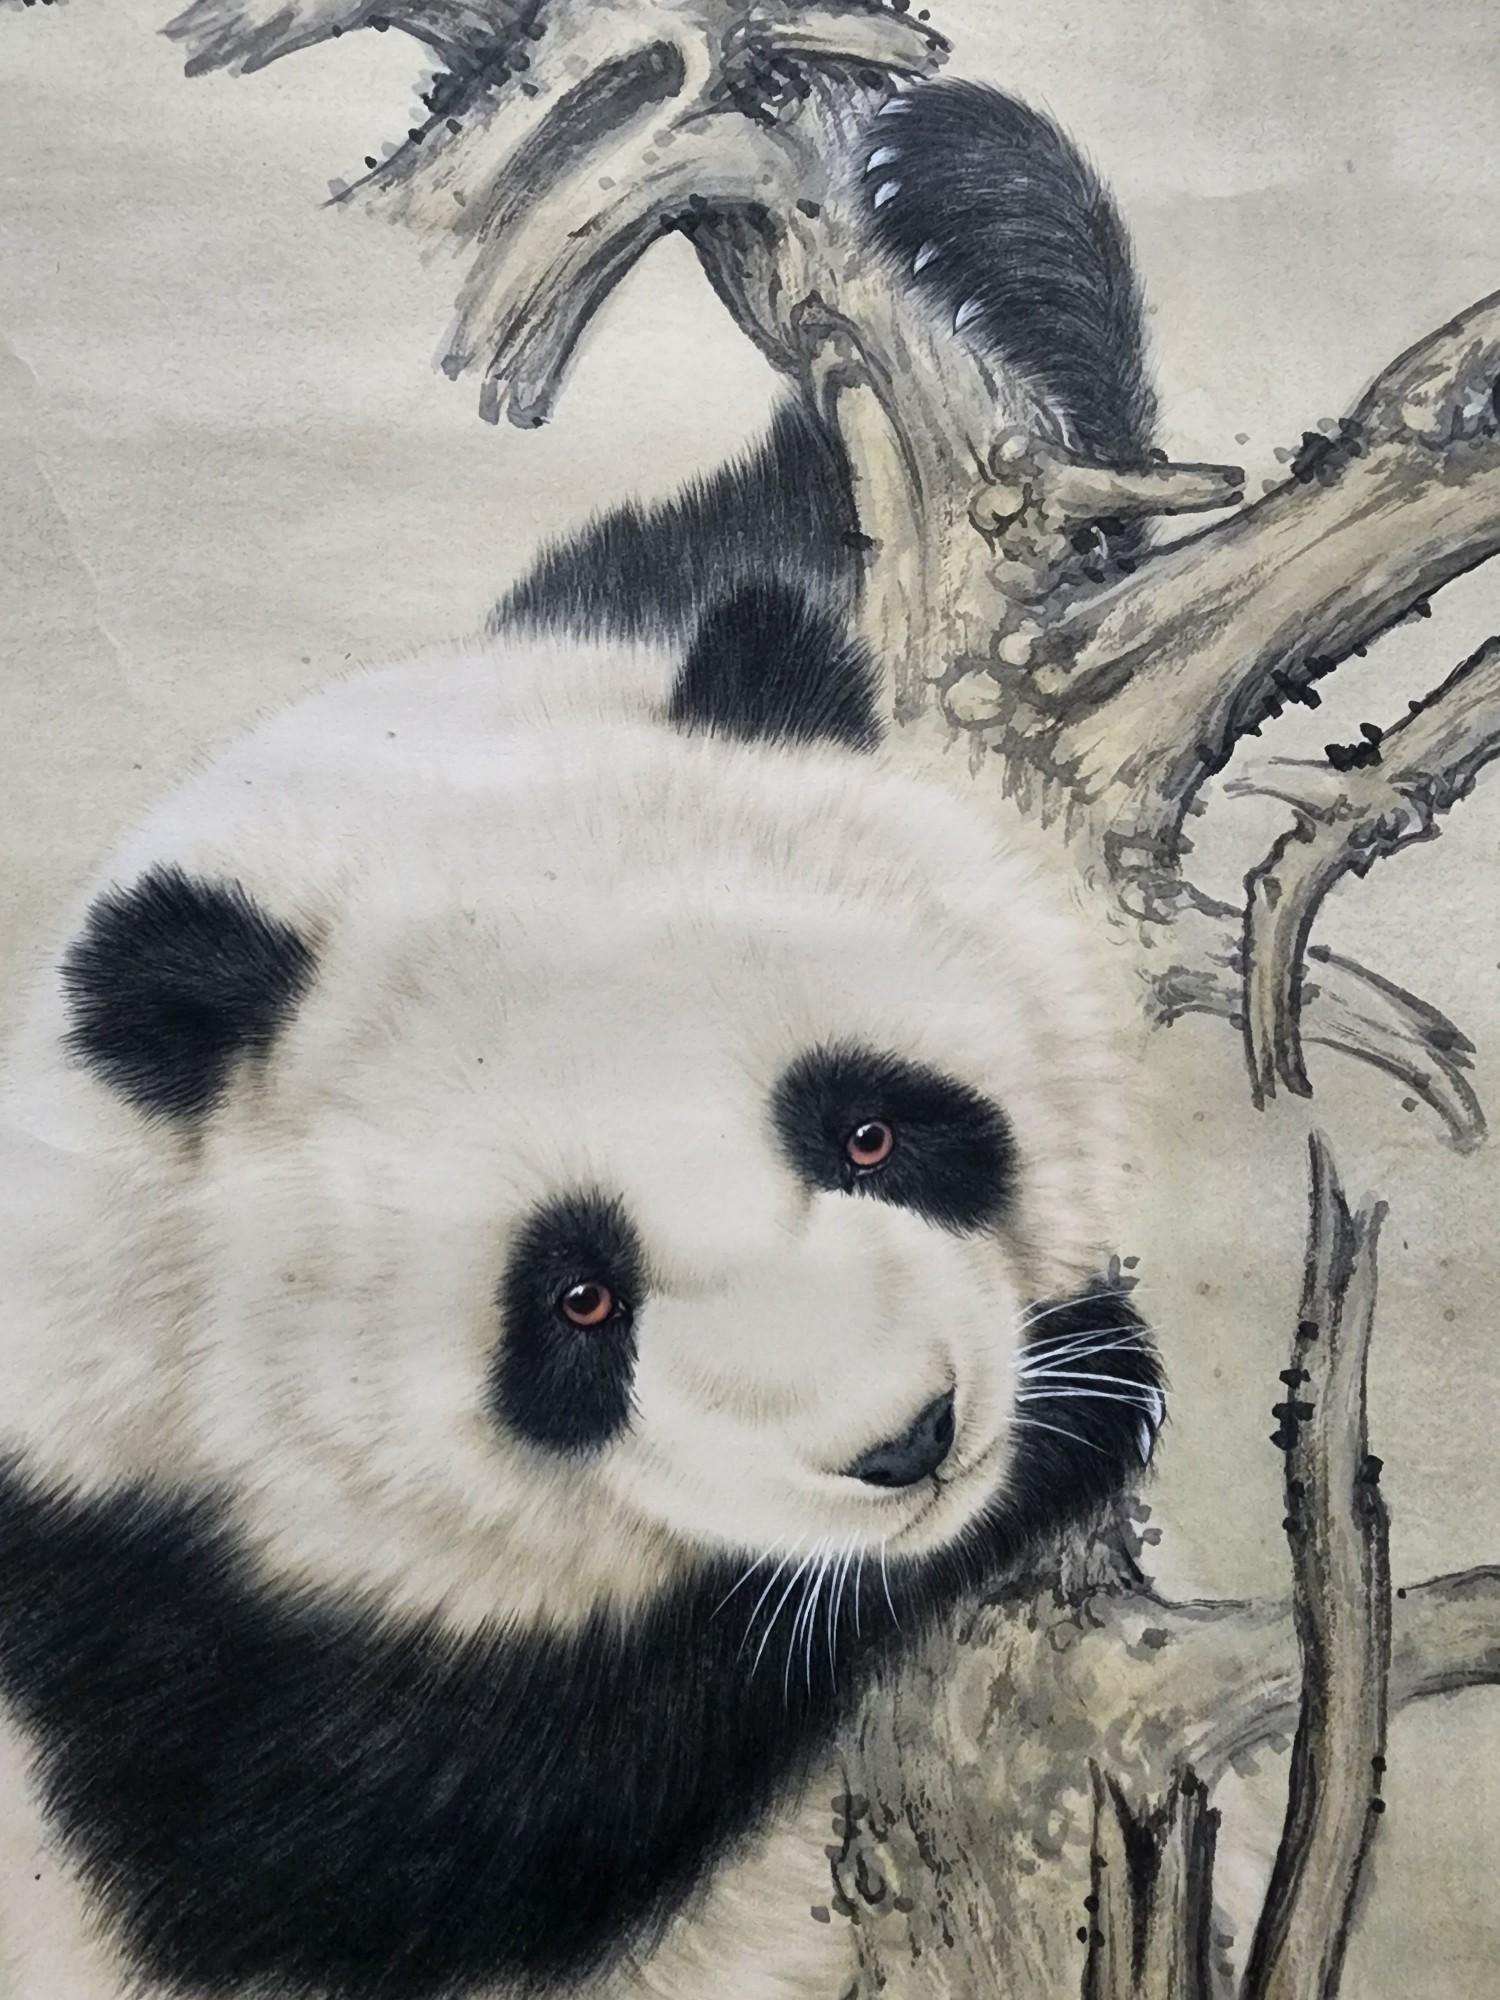 Hand-Painted Hand Painting Two Climbing Pandas by Famous Chinese Artist Wang Shengyong  For Sale